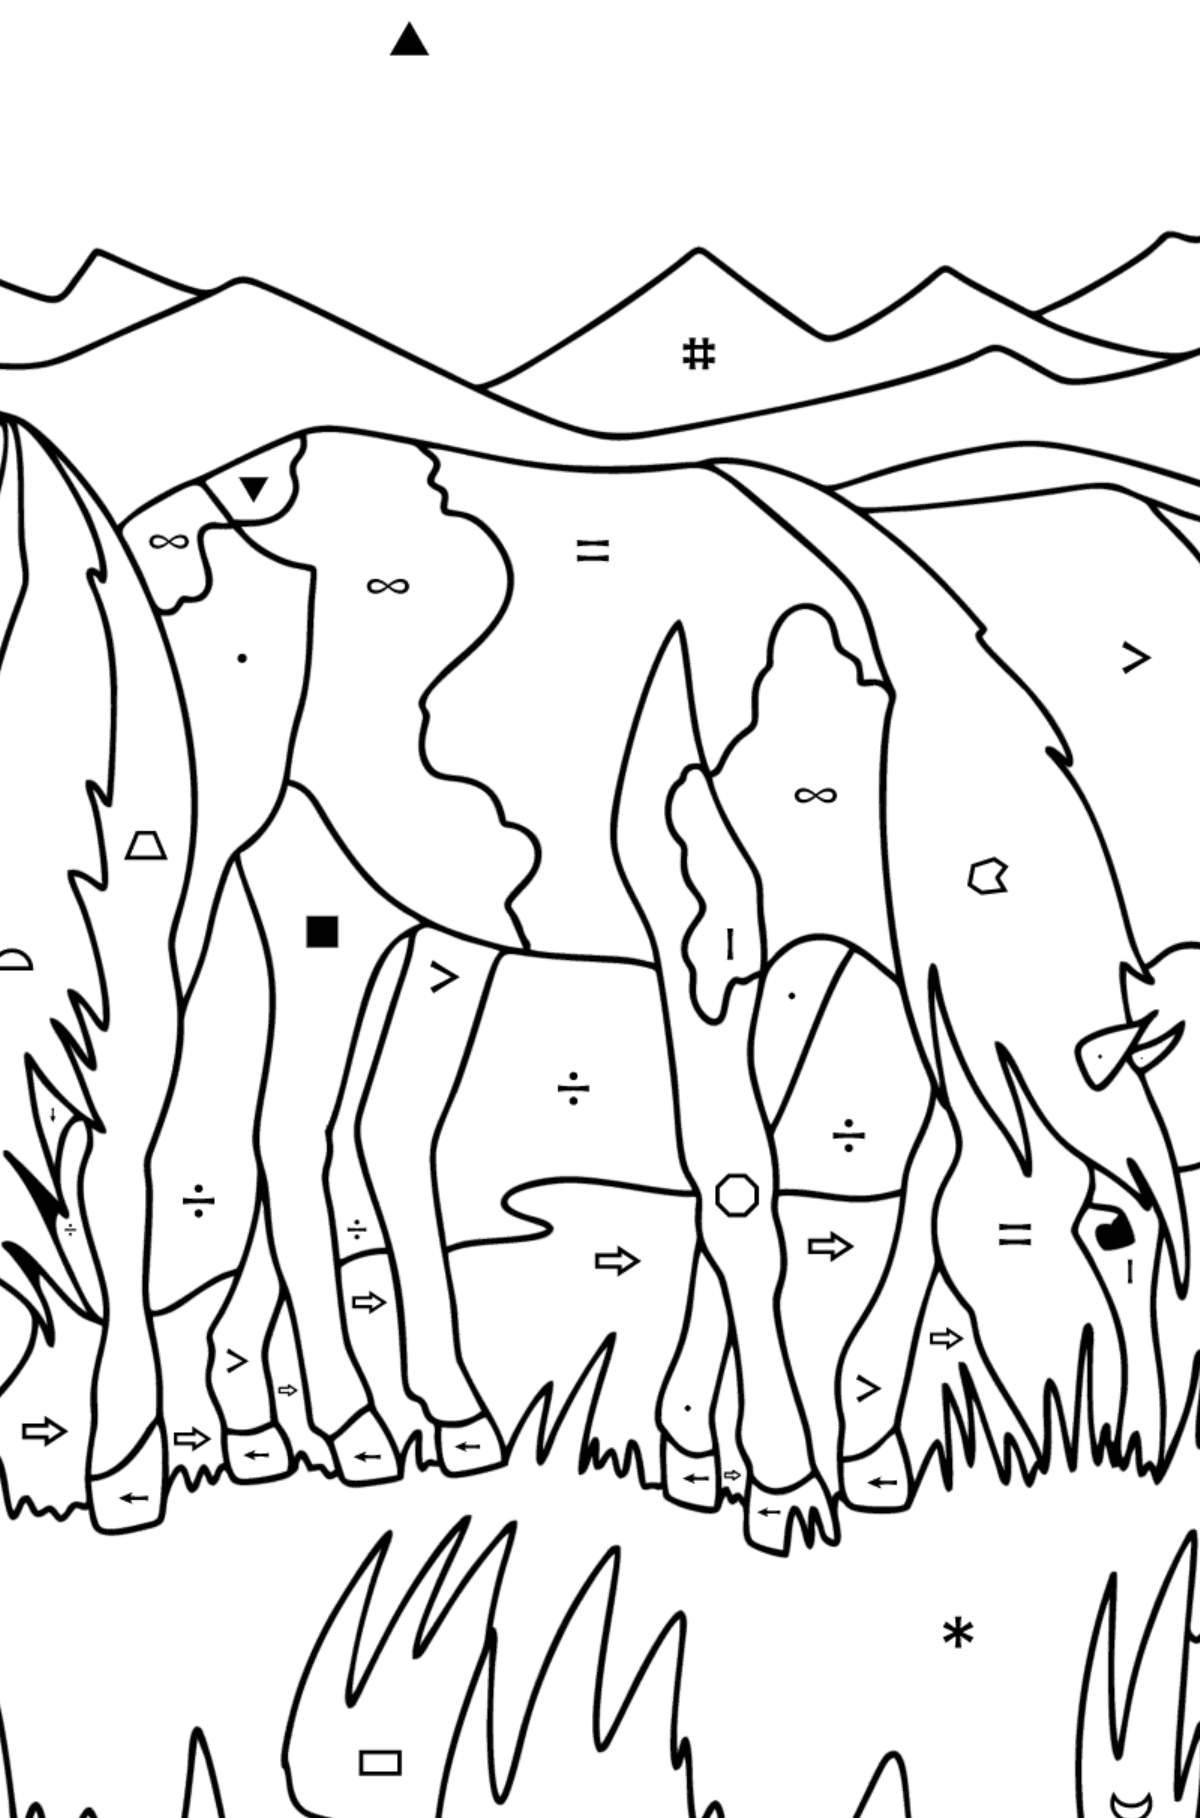 Horses graze сoloring page - Coloring by Symbols and Geometric Shapes for Kids